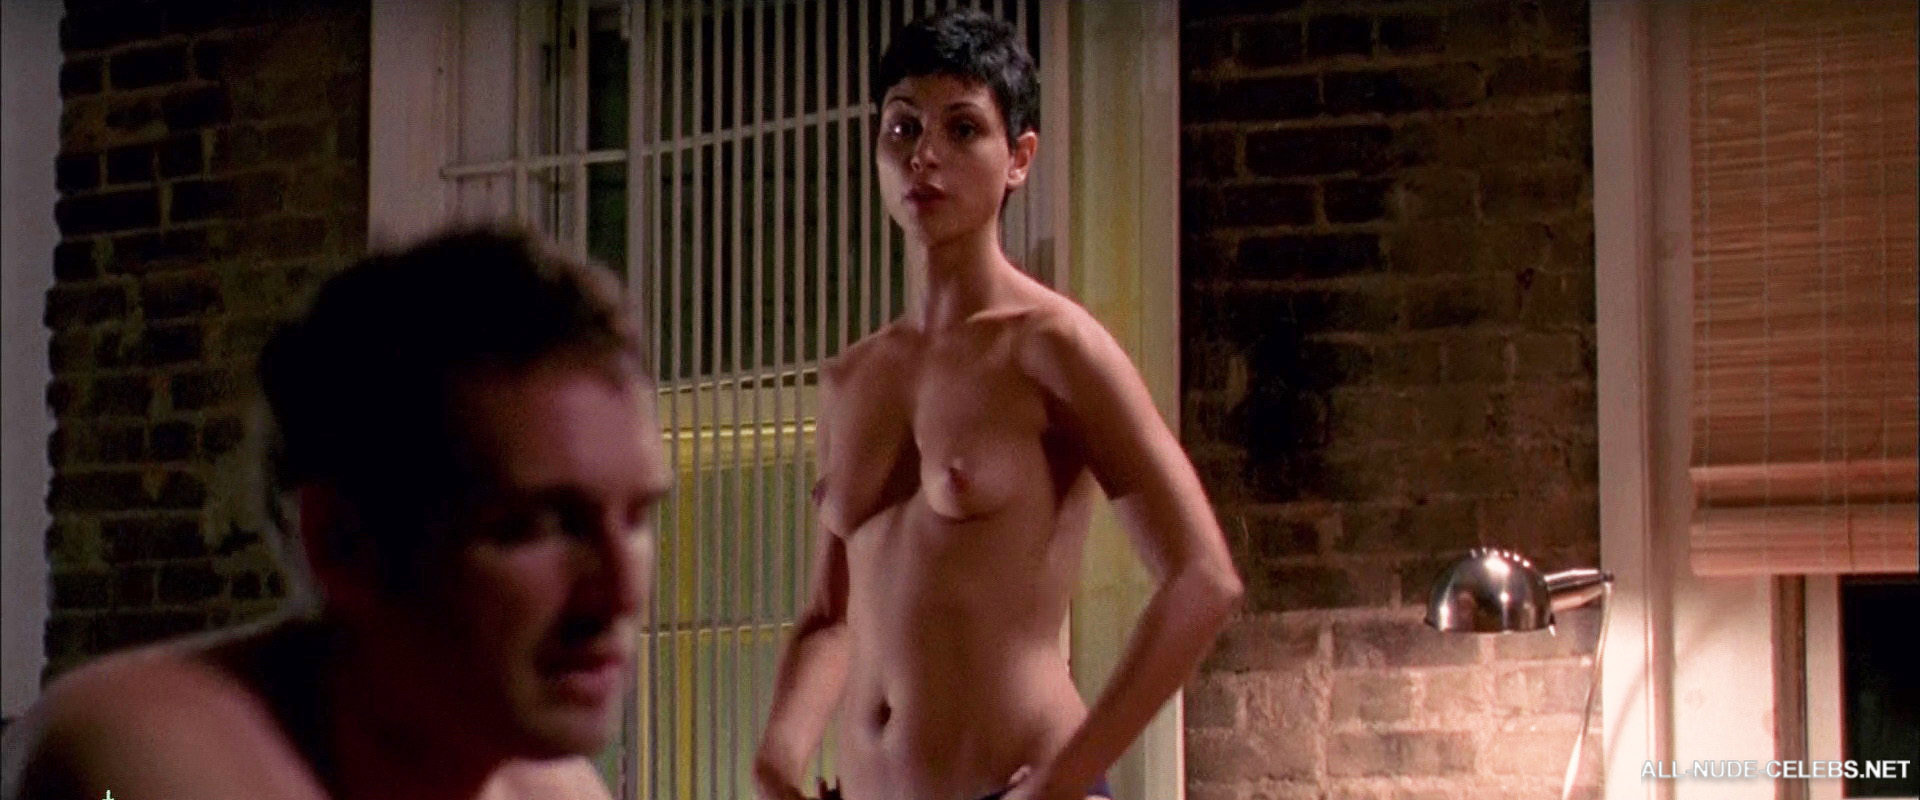 Morena Baccarin naked and hot sex scenes.